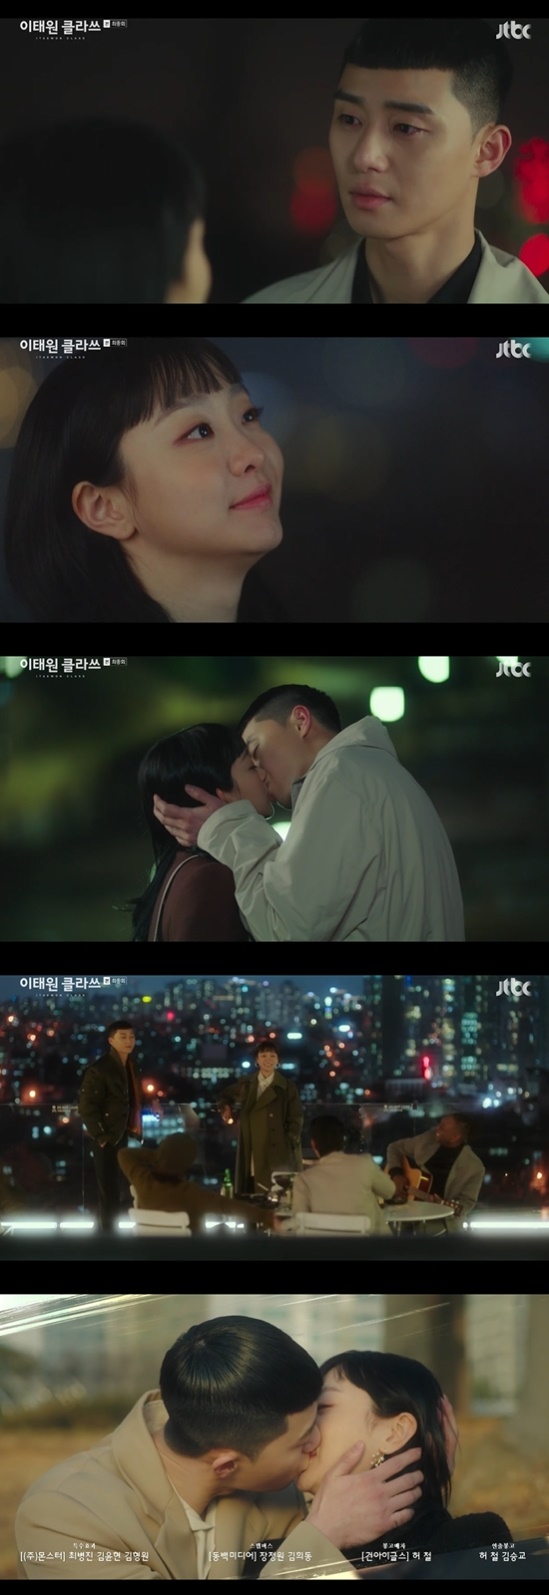 Itaewon Clath Park Seo-joon succeeded in revenge by acquiring Jangga, and also made love with Kim Da-mi.In the final episode of JTBC Itaewon Clath, a comprehensive channel broadcast on the 21st, Park Bo-gum appeared in a special appearance.Park Seo-joon kneeled in front of Jang Dae-hee to save Joe-yool Lee (Kim Da-mi), but said, I feel sorry for the time I tried to catch up with this ugly old man.Then Roy finally found Joe-yool Lee, but Danger was not over.Park, who left Choi Seung-kwon (Ryu Kyung-soo) to take Joe-yool Lee and ran away, conveyed his heart to Joe-yool Lee.My heart is full of you, I love you, its Seo-yool Lee, I love you so much, Park said, hugging Joe-yool Lee.But then Jean (Season Bo-hyun) chased him down, and Roy tried to send Joe-yool Lee first.Joe-yool Lee fled, asking, If the delegate dies, I will die, and Park started his last fight with The Fountainhead.The winner was Roy.The murder teacher, the kidnapping of Osua (Kwon Nara) was followed by accusations of corruption, and Jangga was put on the sale Danger.Jang Dae-hee tried to protect the falling Jangga, but it was a fight that had already ended.Park said, Come back, its a night, as she first said, and then gave me a tofu stew containing a recipe from her father, Park Sung-yeol (Son Hyun-joo).Jang Dae-hee kneeled and wept, saying, I sincerely apologize. But Park said, Do I look like a hogu? Im a businessman.Then, Park bought the long-term and started a loving relationship with Joe-yool Lee.Joe-yool Lee said, I thought I would give you the pain of the boss.I think my empty routine is over to you. Thank you. I love you. Ill let you happy. Roy said, I love you, too.Its Seo-yool Lee, he kissed.Meanwhile, Itaewon Clath sequel The World of Couples will be broadcasted at 10:50 pm on the 27th.Photo = JTBC Broadcasting Screen